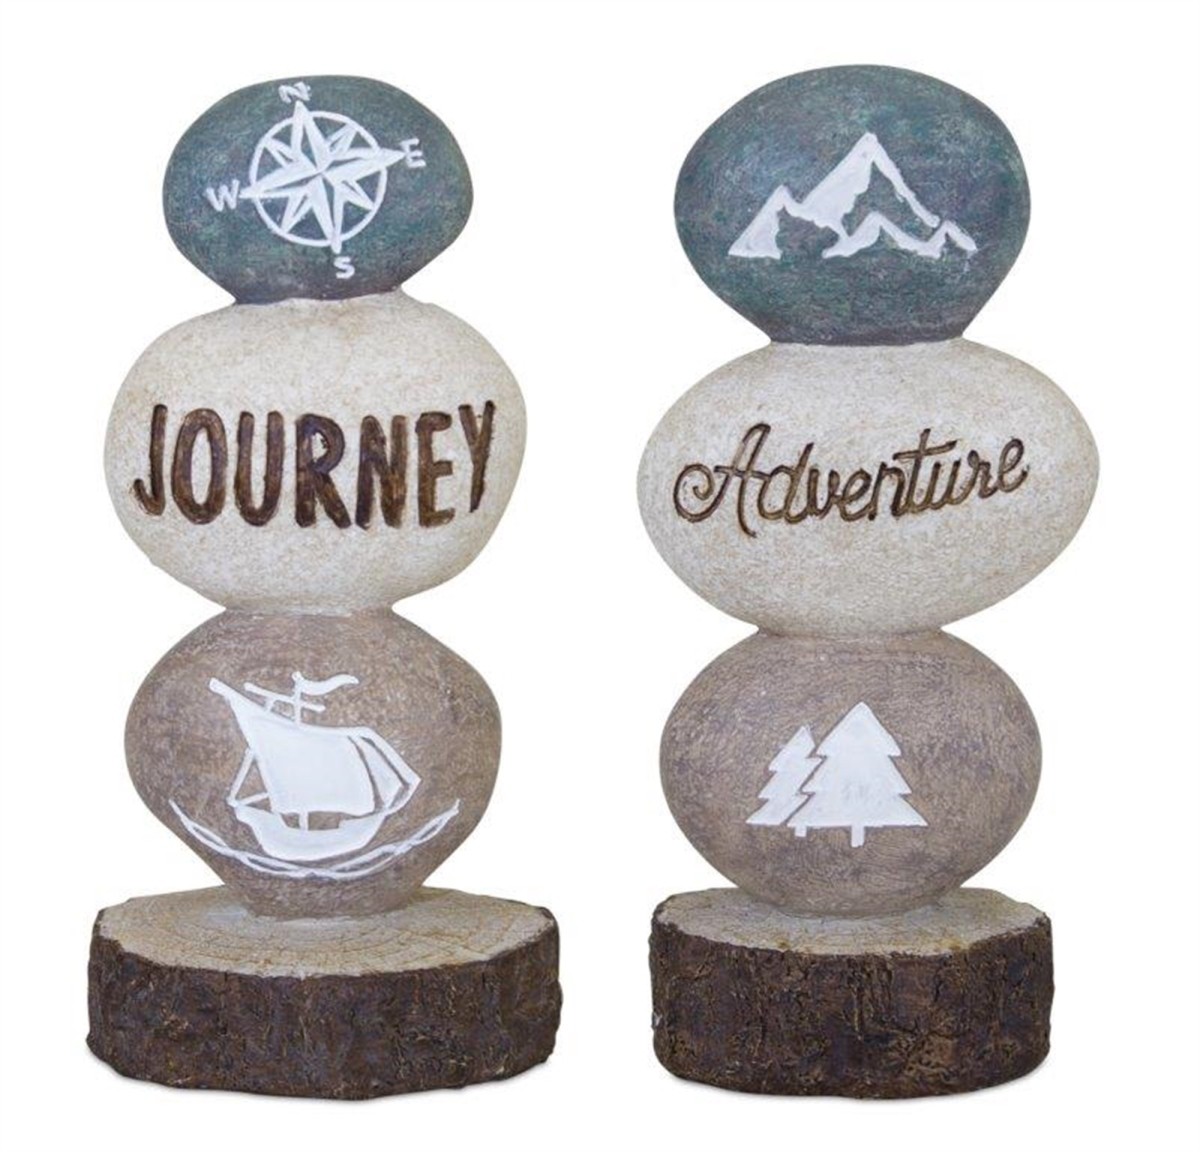 Journey and Adventure Rock Stack (Set of 2) 4"L x 8"H, 4"L x 8.75"H Resin